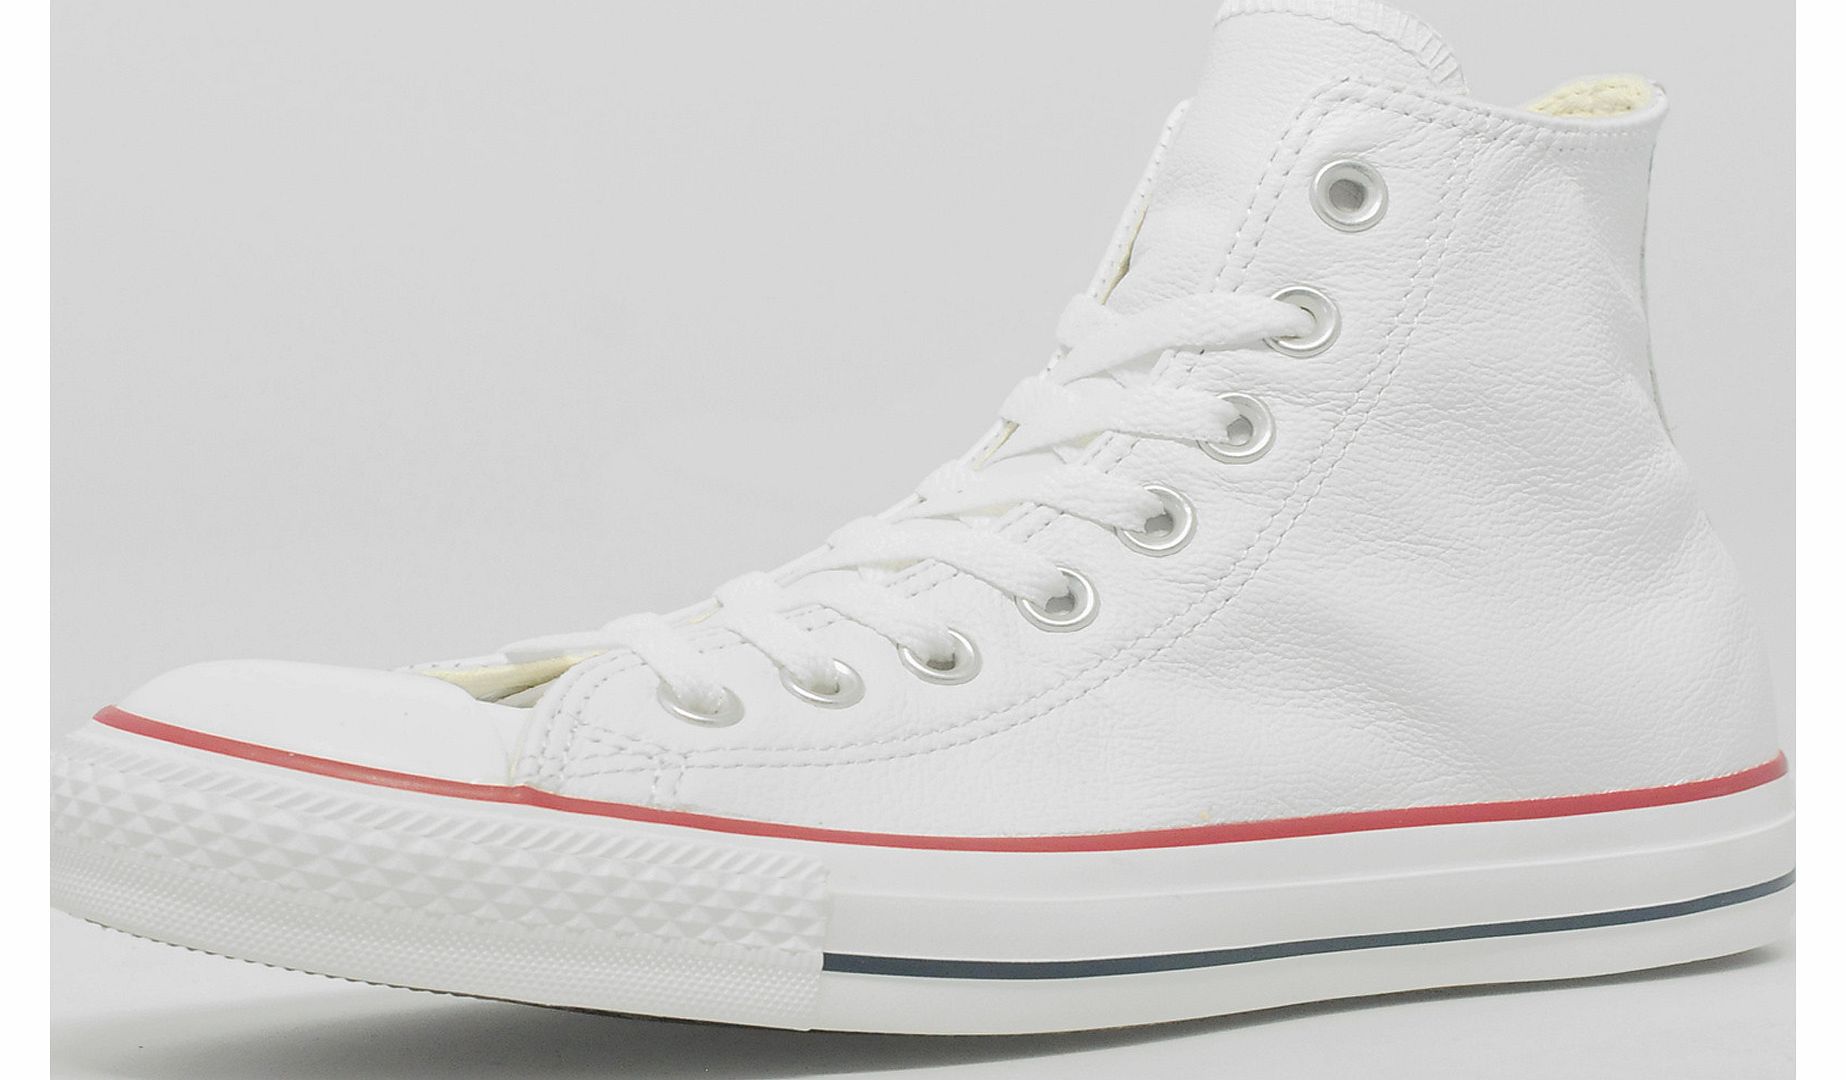 Converse All Star Hi Leather